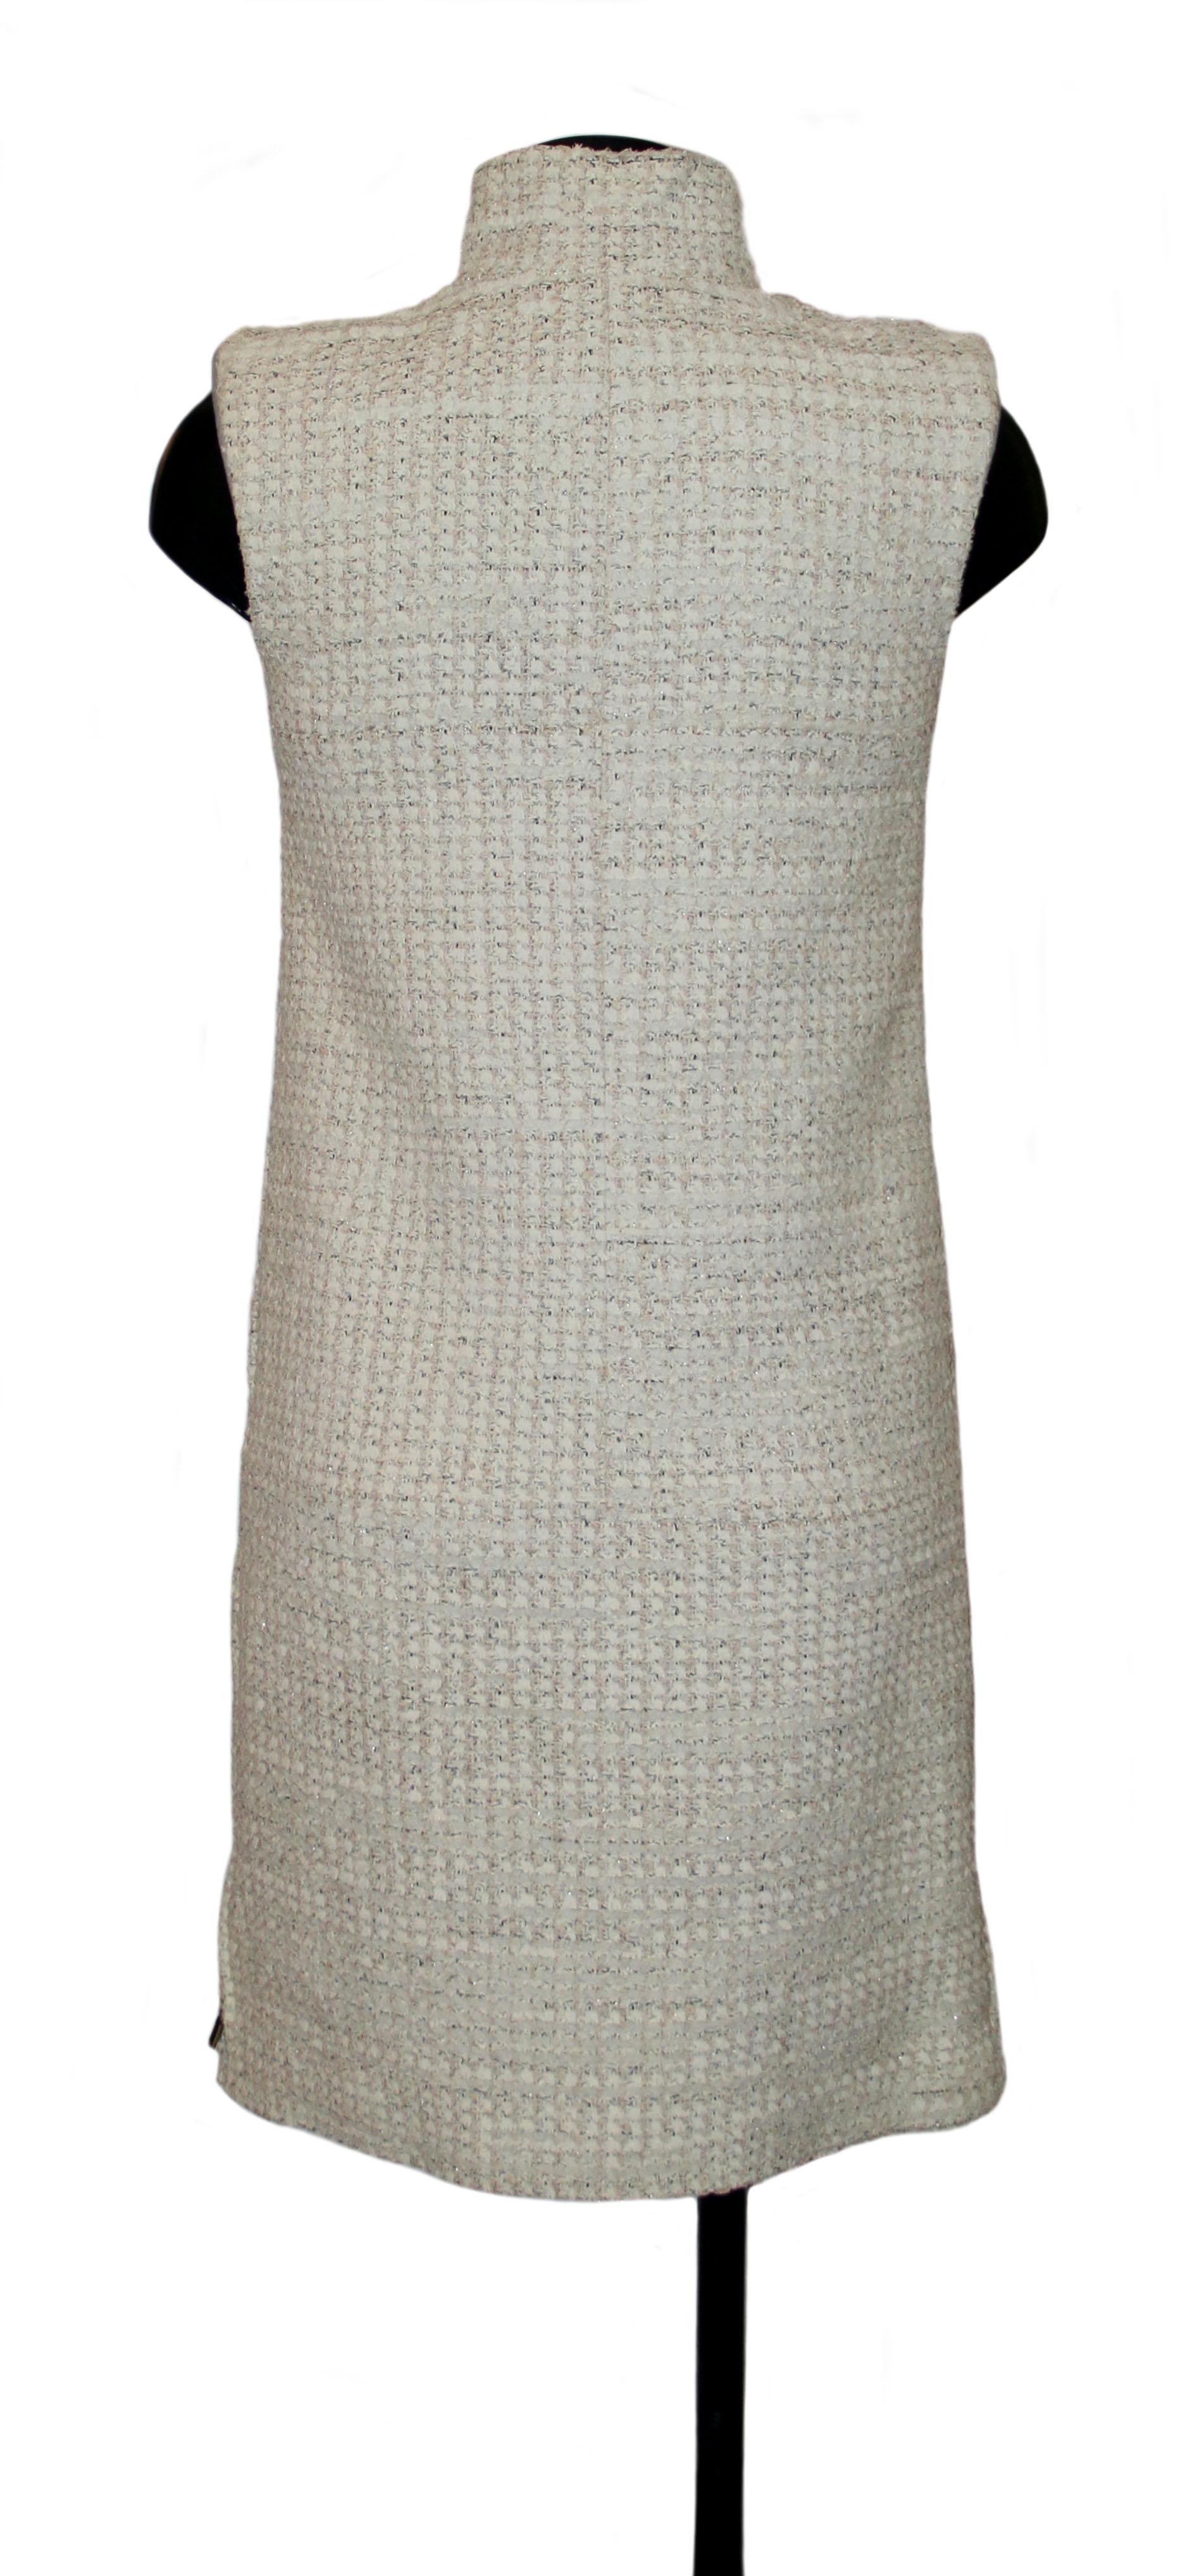 This pre-owned ivory dress from the house of Chanel is crafted in a Lesage tweed, lined with soft lambskin inset on the shoulders and the neck line. The dress itself is lined with pure tone on tone silk.
It features 4 pearl buttons in the shape of